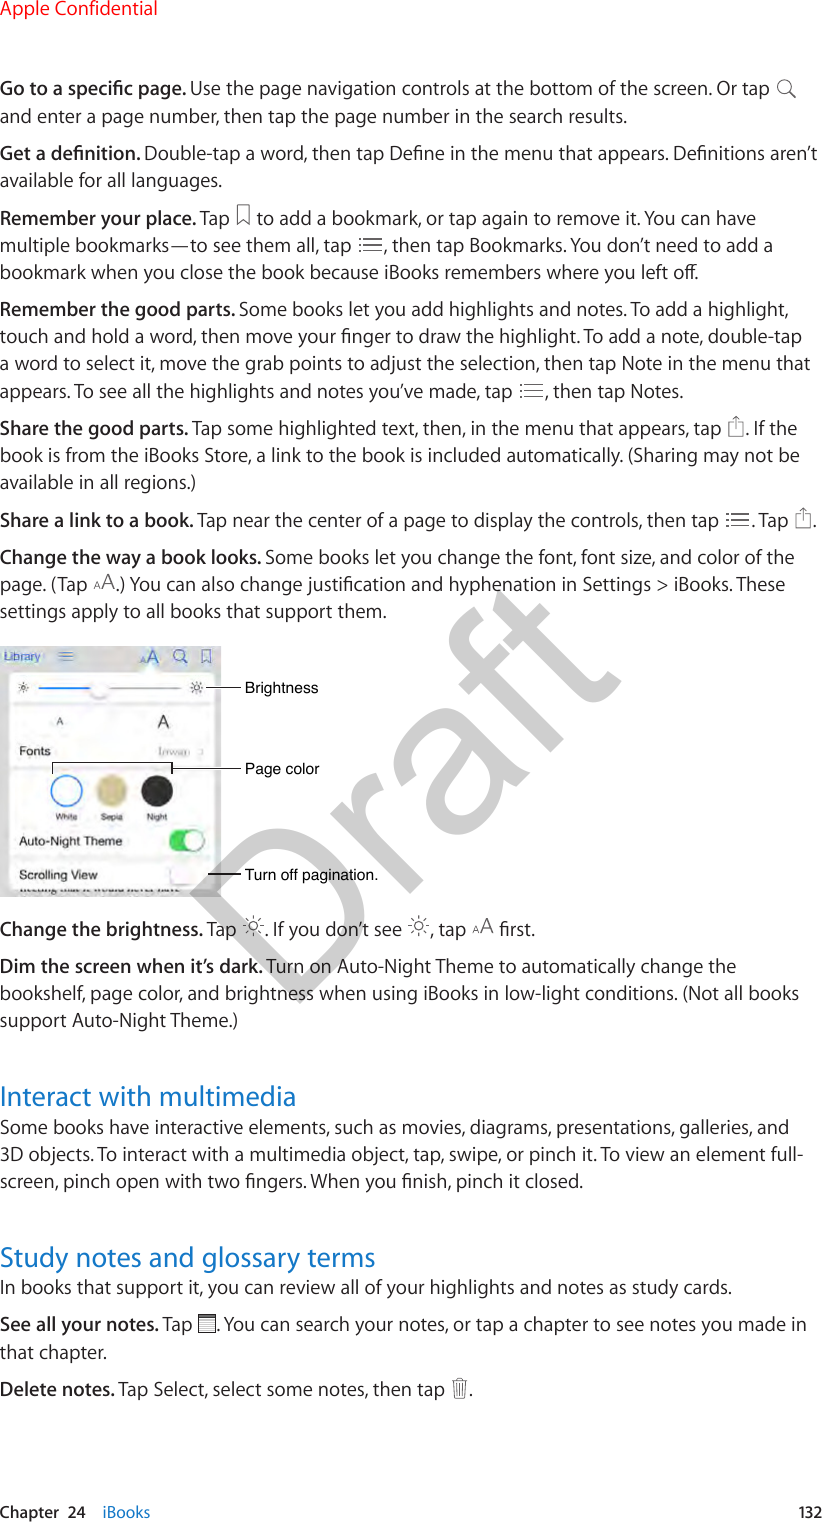 Chapter  24    iBooks  132Go to a specic page. Use the page navigation controls at the bottom of the screen. Or tap and enter a page number, then tap the page number in the search results.Get a denition. Double-tap a word, then tap Dene in the menu that appears. Denitions aren’t available for all languages.Remember your place. Tap   to add a bookmark, or tap again to remove it. You can have multiple bookmarks—to see them all, tap  , then tap Bookmarks. You don’t need to add a bookmark when you close the book because iBooks remembers where you left o.Remember the good parts. Some books let you add highlights and notes. To add a highlight, touch and hold a word, then move your nger to draw the highlight. To add a note, double-tap a word to select it, move the grab points to adjust the selection, then tap Note in the menu that appears. To see all the highlights and notes you’ve made, tap  , then tap Notes.Share the good parts. Tap some highlighted text, then, in the menu that appears, tap  . If the book is from the iBooks Store, a link to the book is included automatically. (Sharing may not be available in all regions.)Share a link to a book. Tap near the center of a page to display the controls, then tap  . Tap  .Change the way a book looks. Some books let you change the font, font size, and color of the page. (Tap  .) You can also change justication and hyphenation in Settings &gt; iBooks. These settings apply to all books that support them.Page colorPage colorBrightnessBrightnessTurn off pagination.Turn off pagination.Change the brightness. Tap  . If you don’t see  , tap   rst.Dim the screen when it’s dark. Turn on Auto-Night Theme to automatically change the bookshelf, page color, and brightness when using iBooks in low-light conditions. (Not all books support Auto-Night Theme.)Interact with multimediaSome books have interactive elements, such as movies, diagrams, presentations, galleries, and 3D objects. To interact with a multimedia object, tap, swipe, or pinch it. To view an element full-screen, pinch open with two ngers. When you nish, pinch it closed.Study notes and glossary termsIn books that support it, you can review all of your highlights and notes as study cards.See all your notes. Tap  . You can search your notes, or tap a chapter to see notes you made in that chapter.Delete notes. Tap Select, select some notes, then tap  . Apple ConfidentialDraft